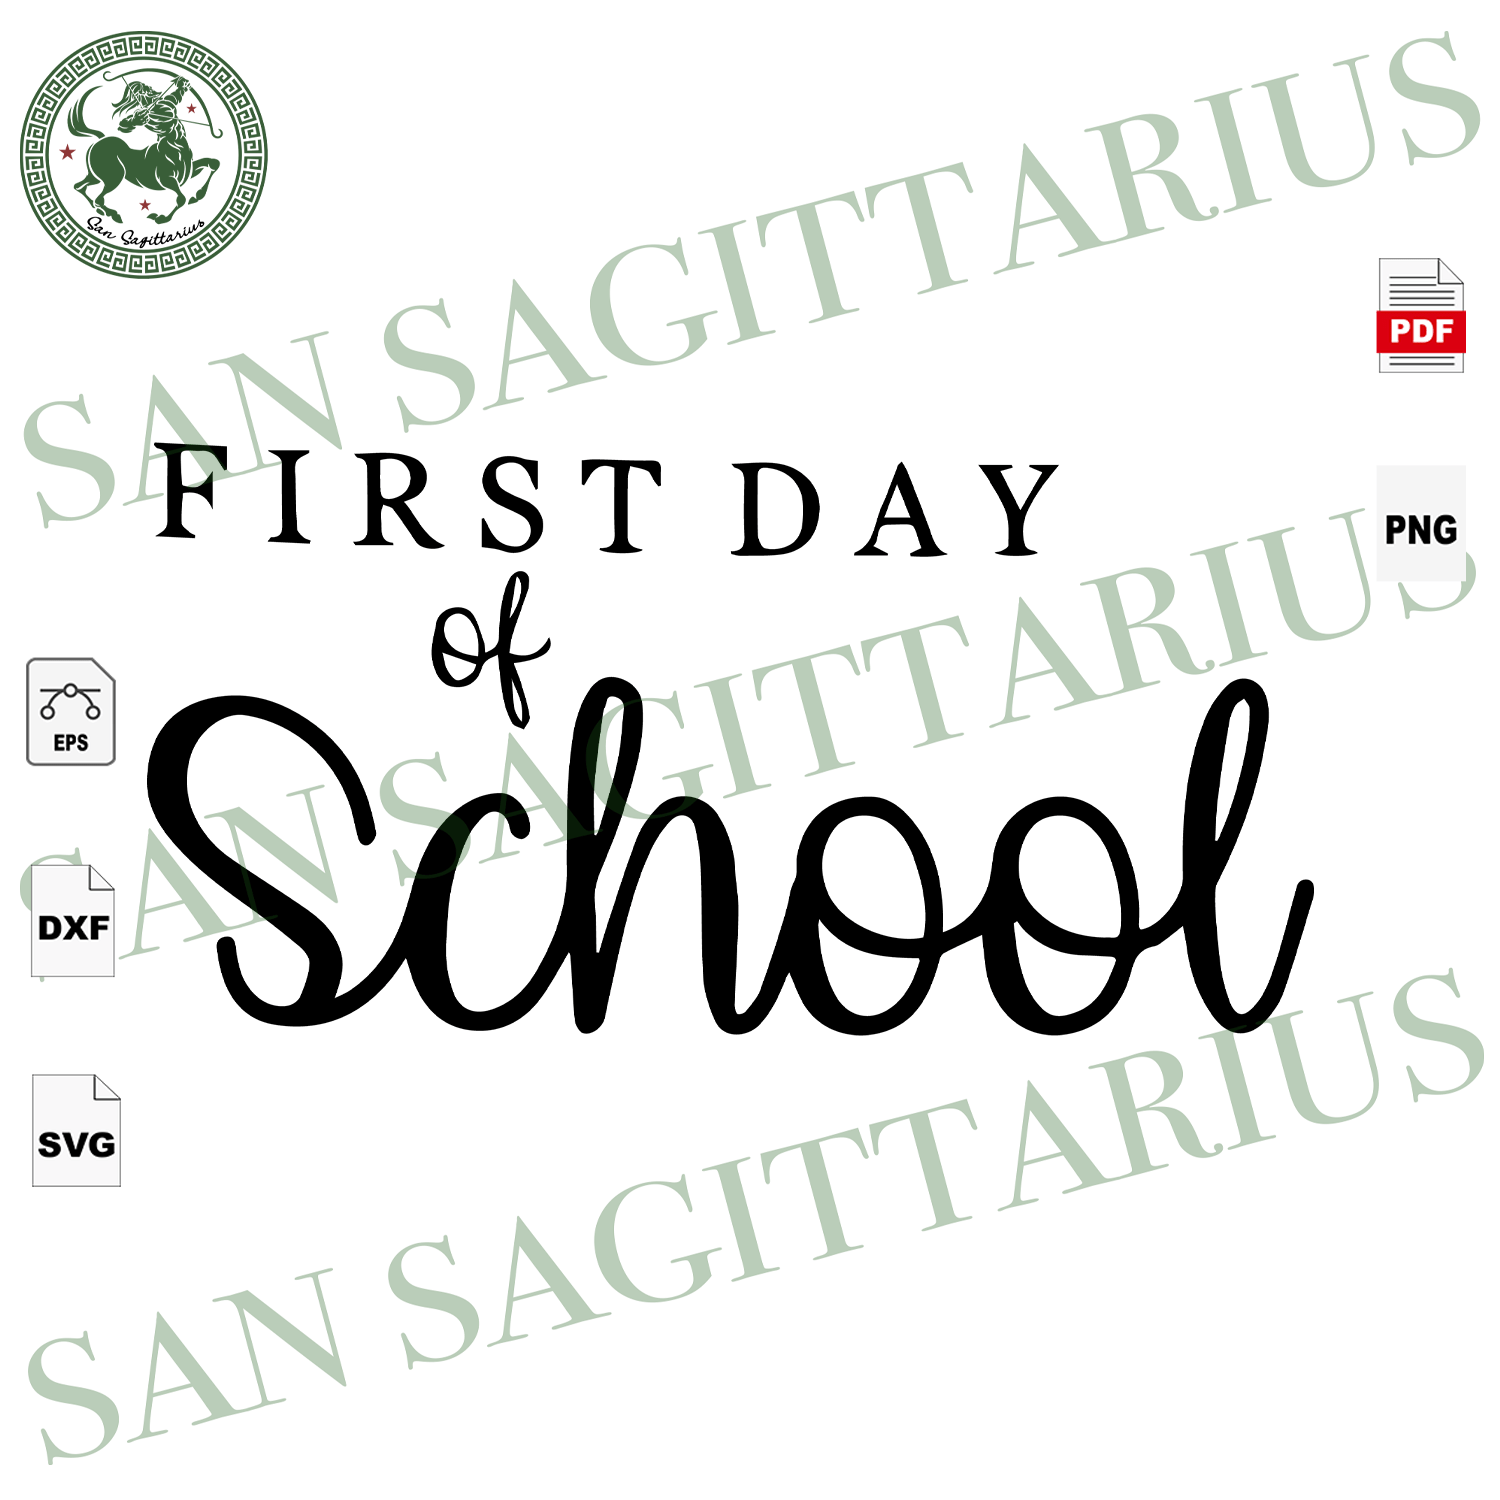 Download First Day Of School 1st Day Of School Back To School Back To School San Sagittarius